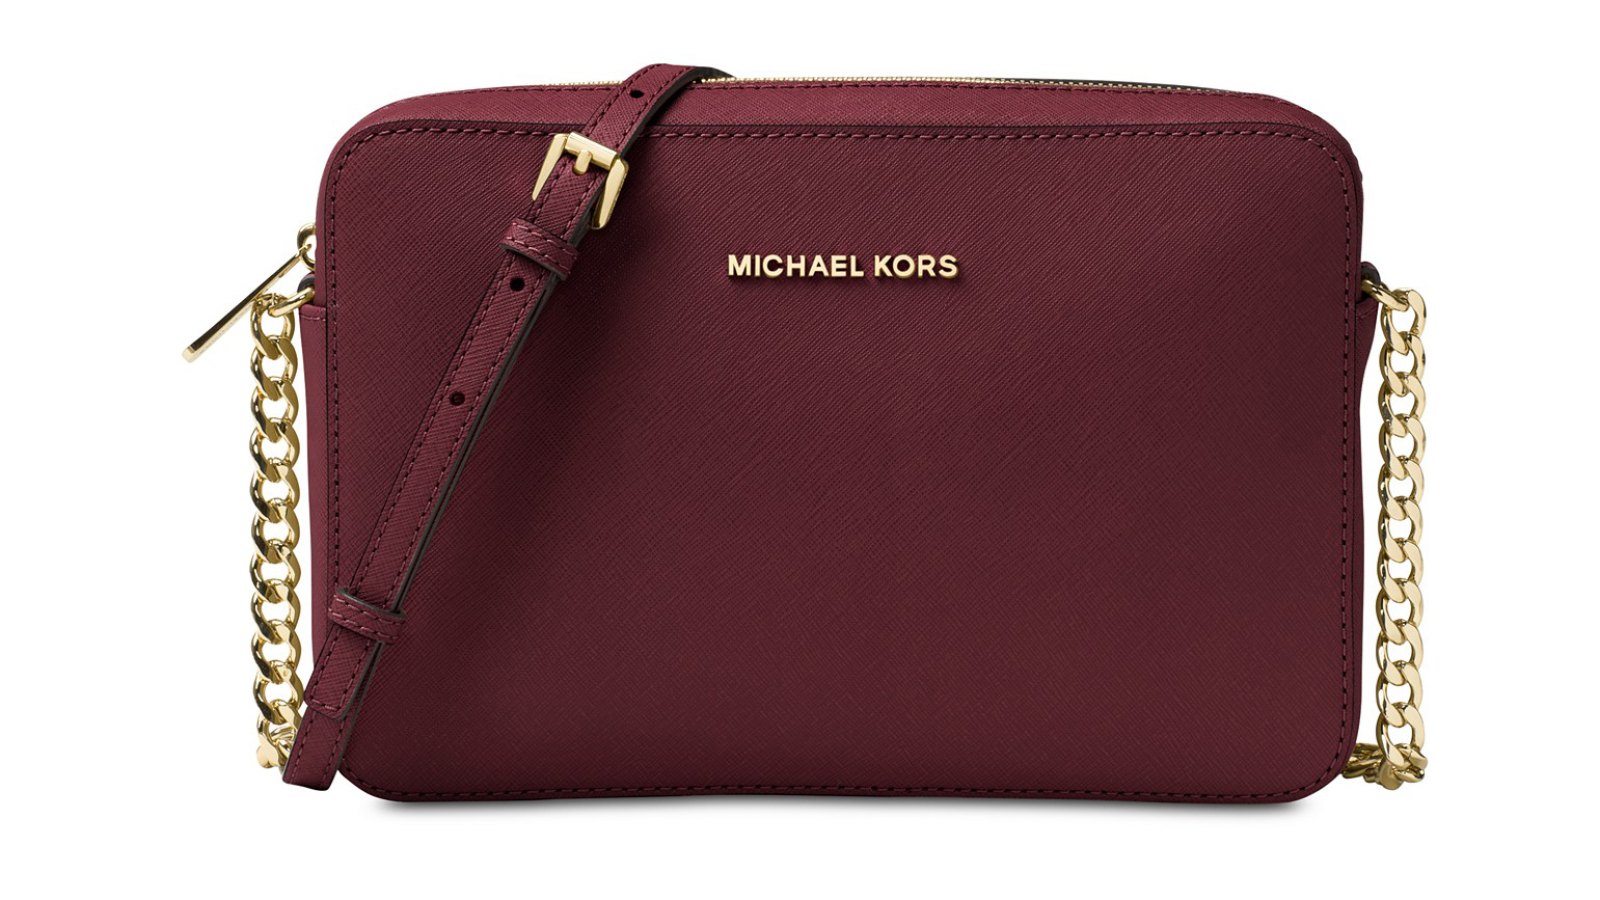 The Best Michael Kors Purses To Buy For Under $250 - PureWow